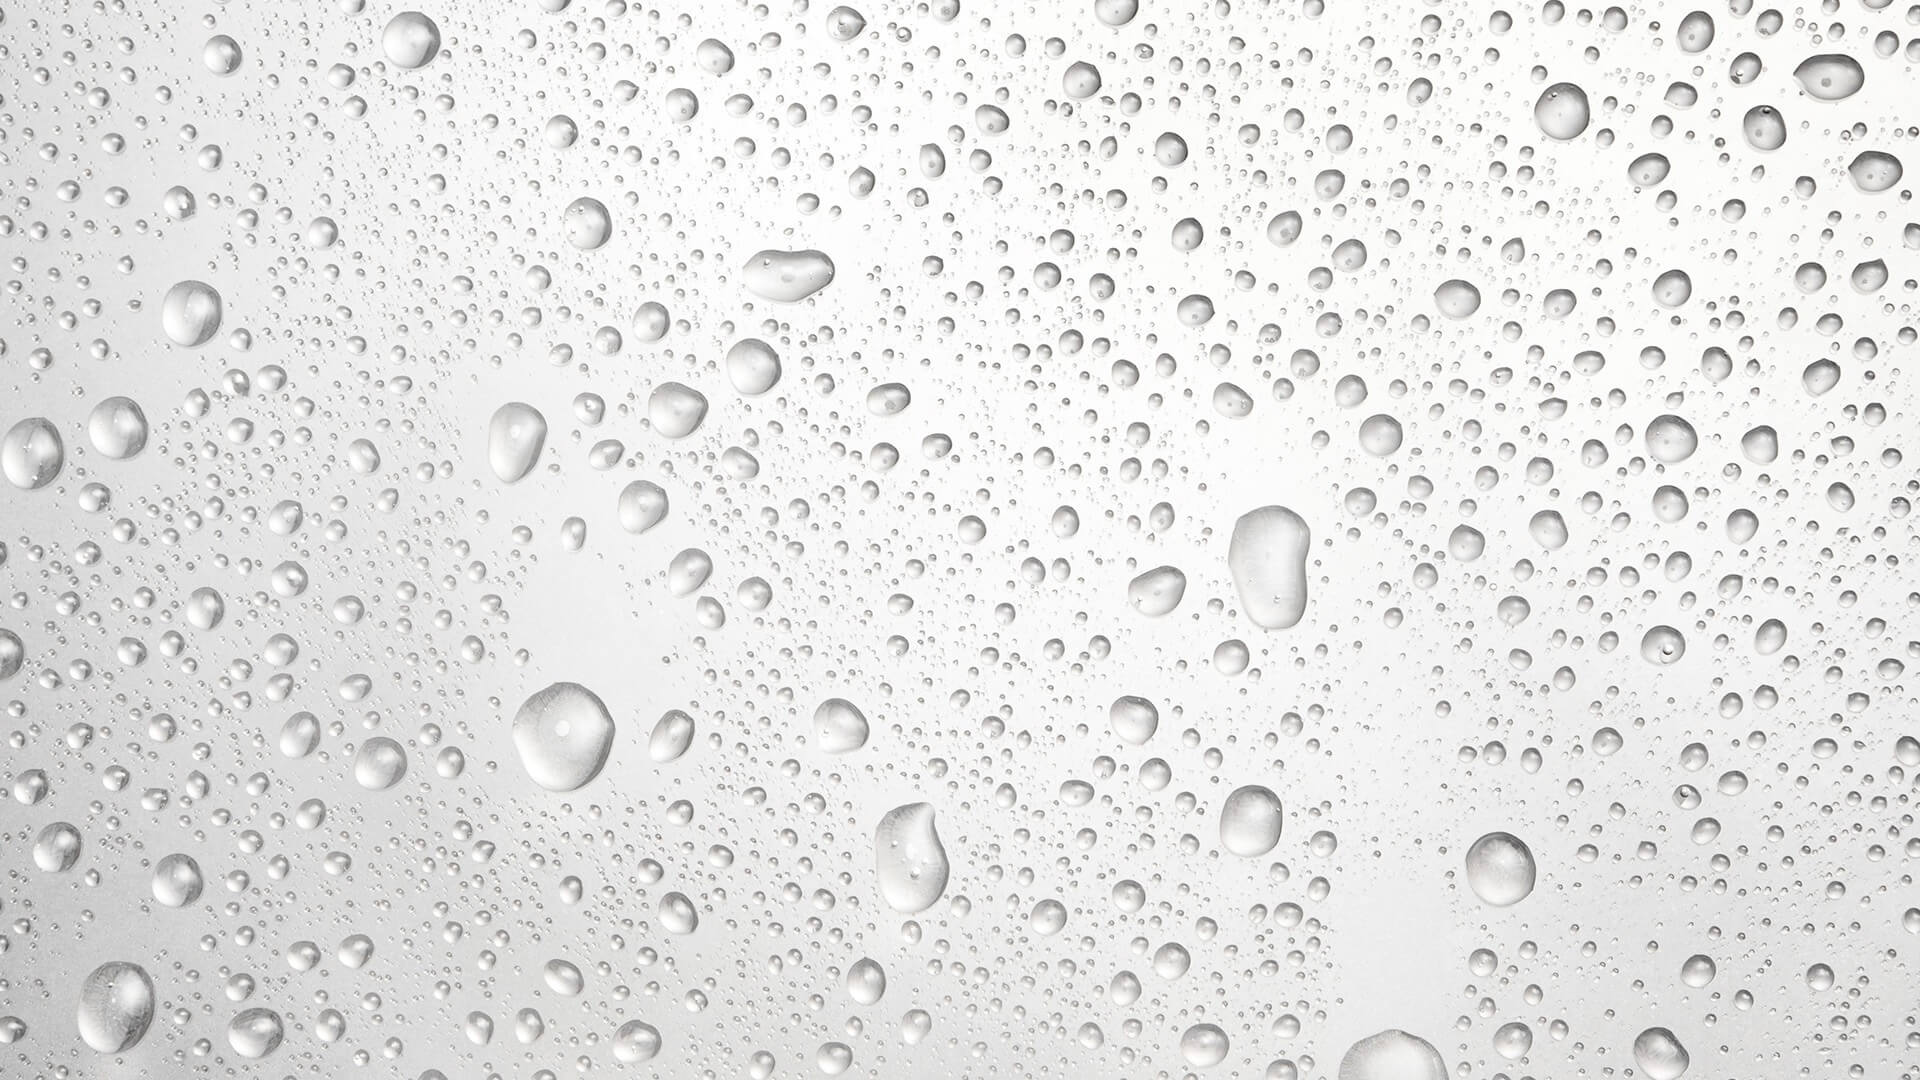 Background Image - Water Droplets